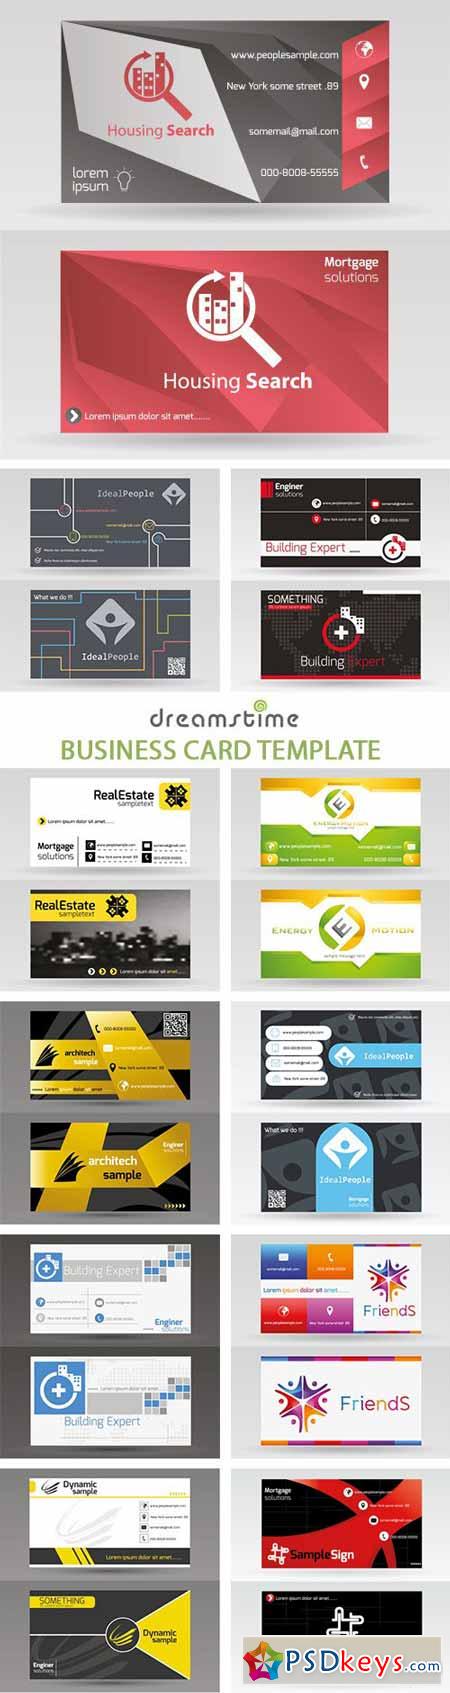 Business Card Template - 25xEPS